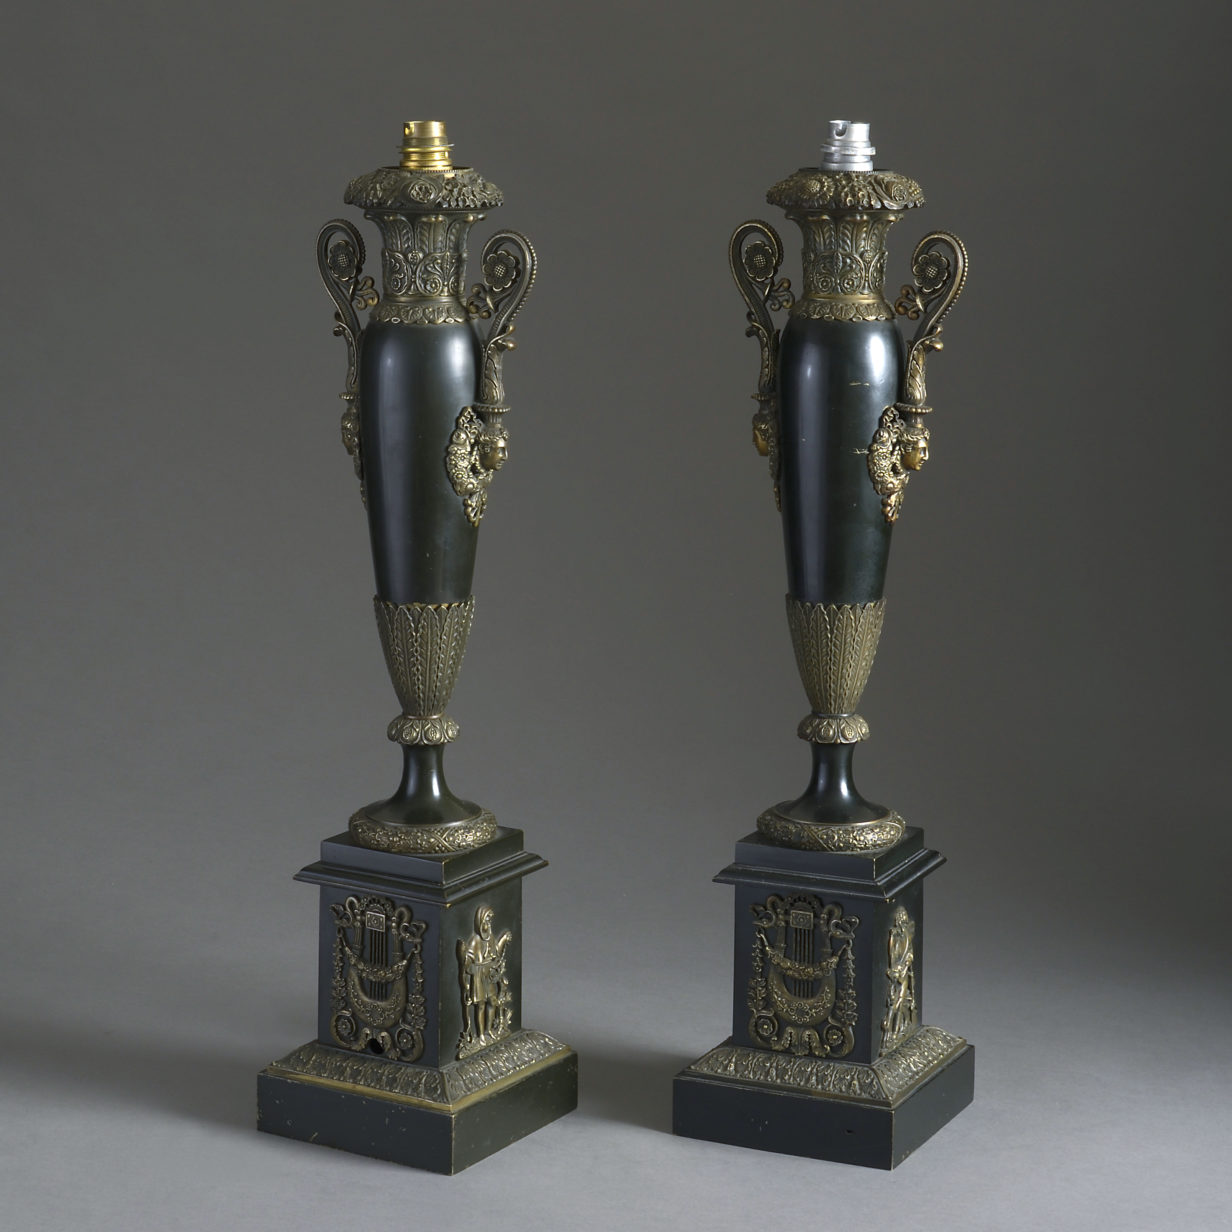 Pair of early 19th century restauration period tole lamps